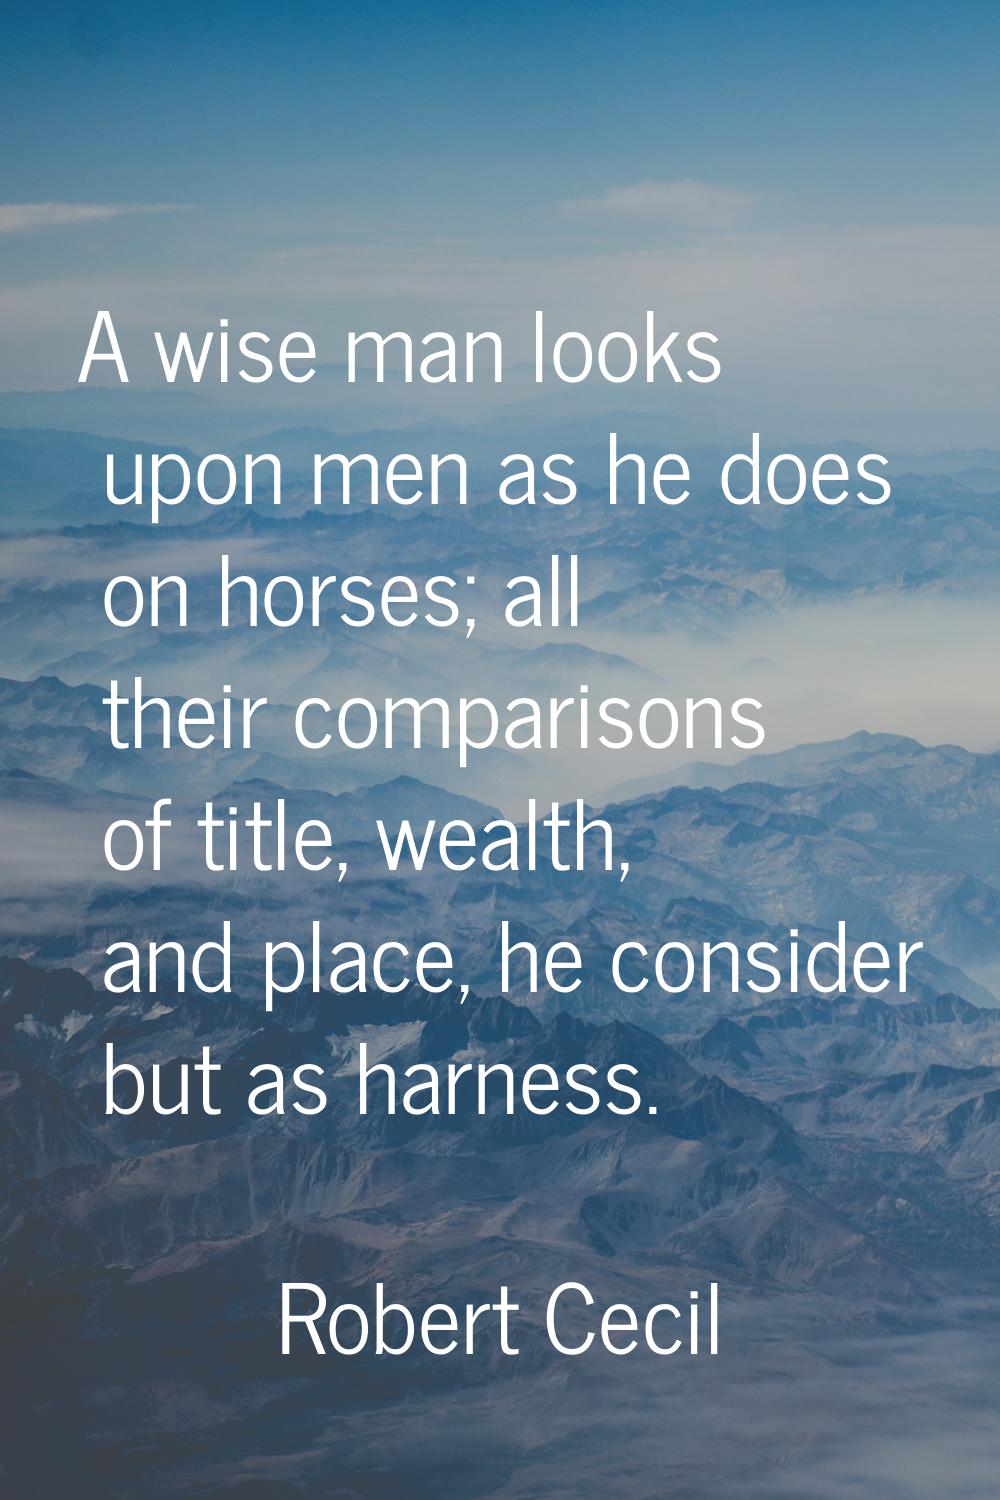 A wise man looks upon men as he does on horses; all their comparisons of title, wealth, and place, 